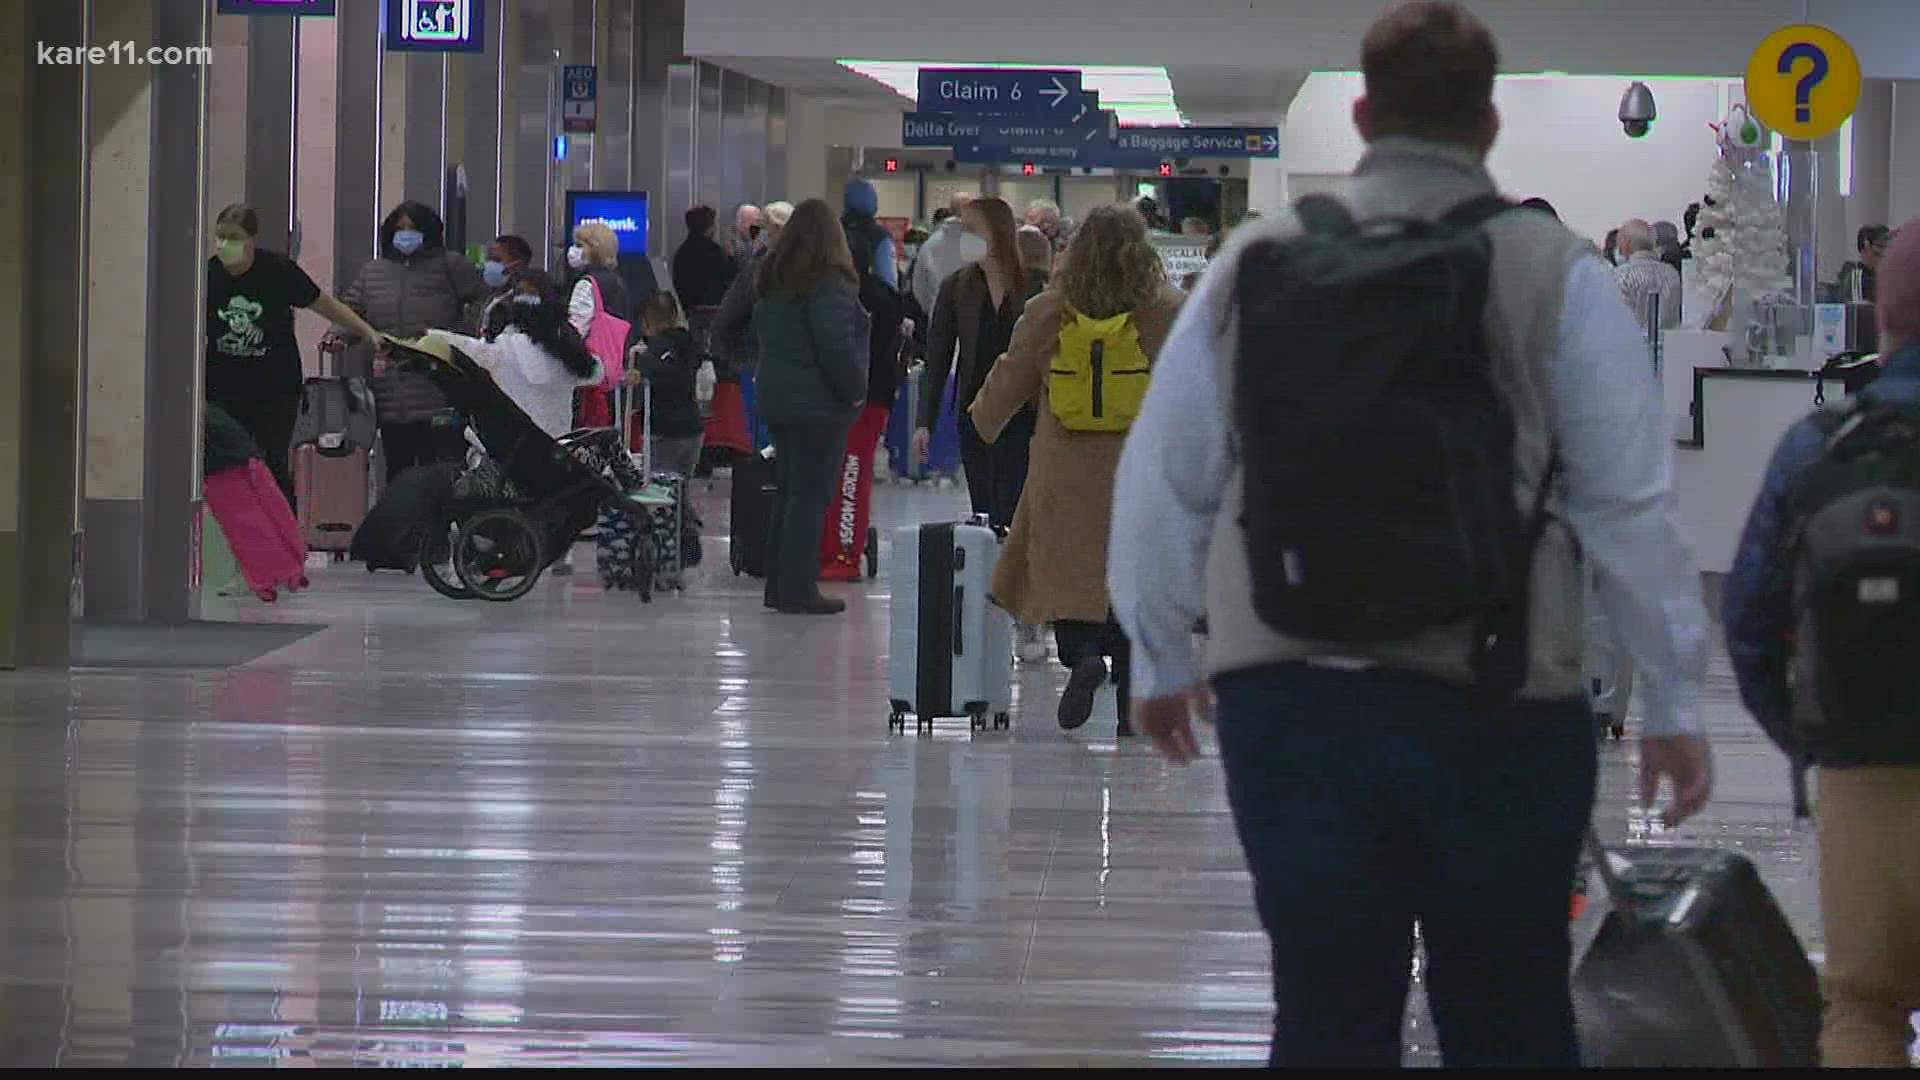 Delays persisted into Thursday night, and things will only get more hectic with holiday travel approaching.